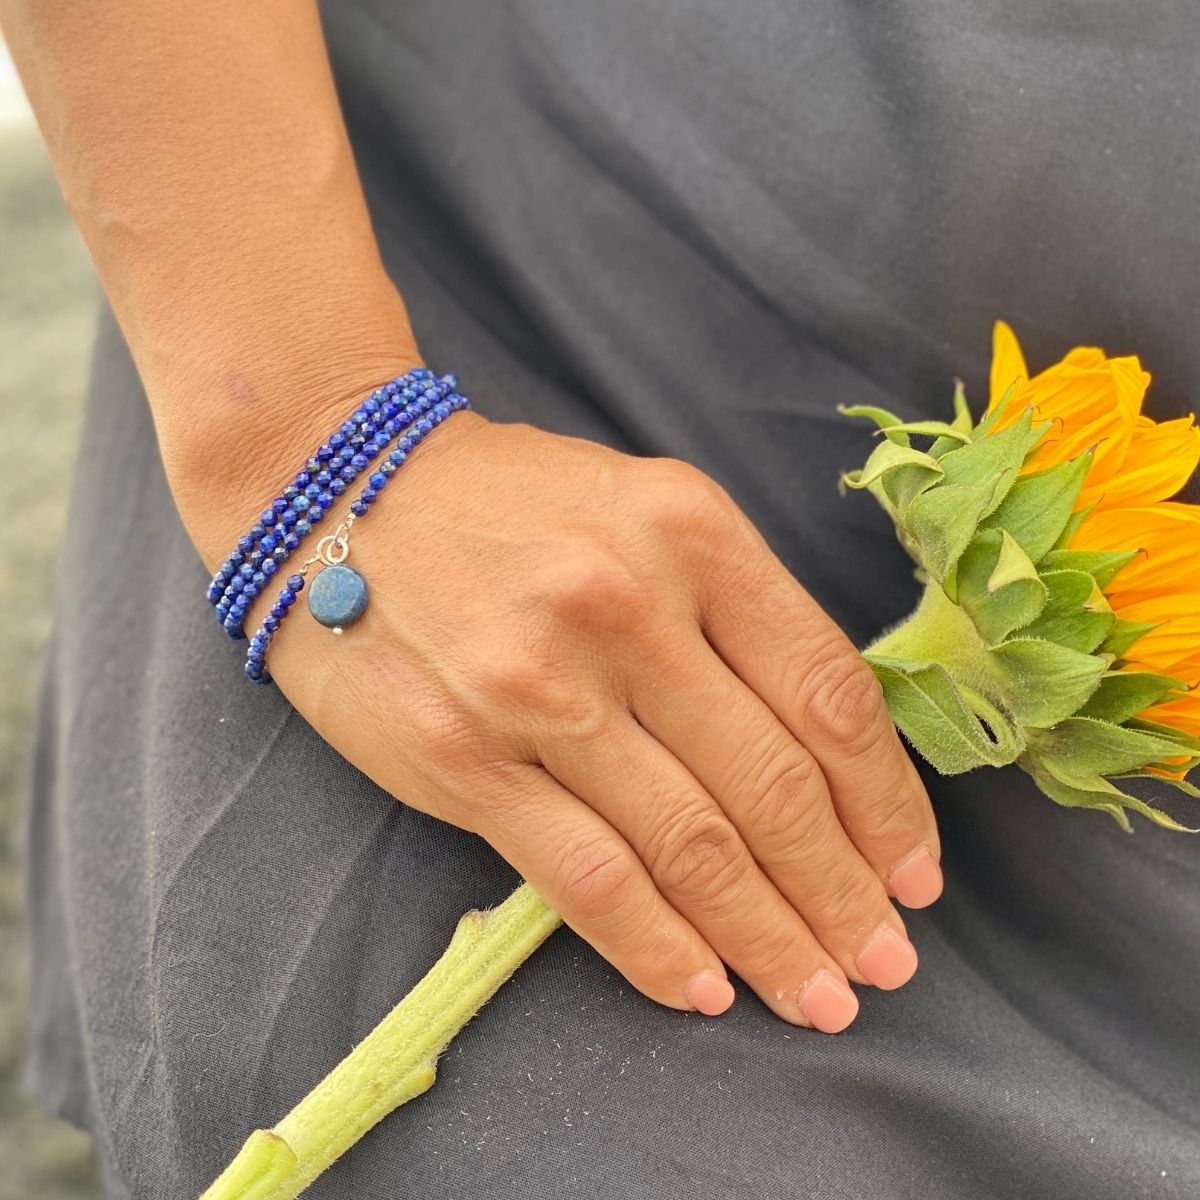 The Lapis Lazuli Meditation Necklace, Wrap Bracelet and Earring Set combines natural beauty with spiritual significance.